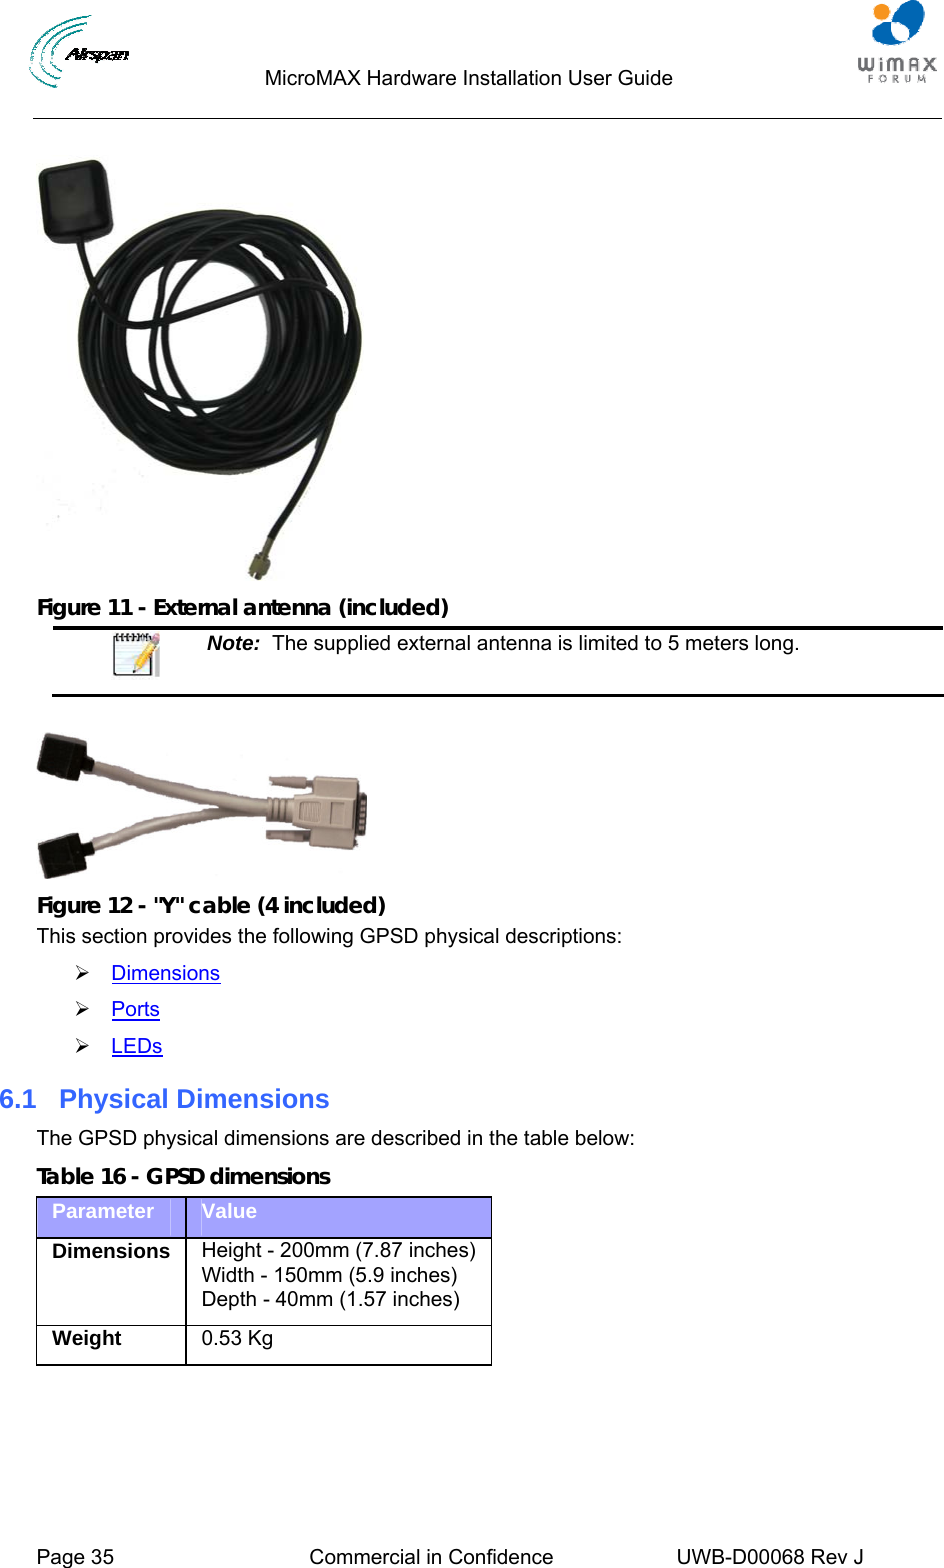                                  MicroMAX Hardware Installation User Guide     Page 35  Commercial in Confidence  UWB-D00068 Rev J     Figure 11 - External antenna (included)  Note:  The supplied external antenna is limited to 5 meters long.   Figure 12 - &quot;Y&quot; cable (4 included) This section provides the following GPSD physical descriptions: ¾ Dimensions ¾ Ports ¾ LEDs 6.1  Physical Dimensions The GPSD physical dimensions are described in the table below: Table 16 - GPSD dimensions Parameter  Value Dimensions  Height - 200mm (7.87 inches)Width - 150mm (5.9 inches) Depth - 40mm (1.57 inches) Weight  0.53 Kg  